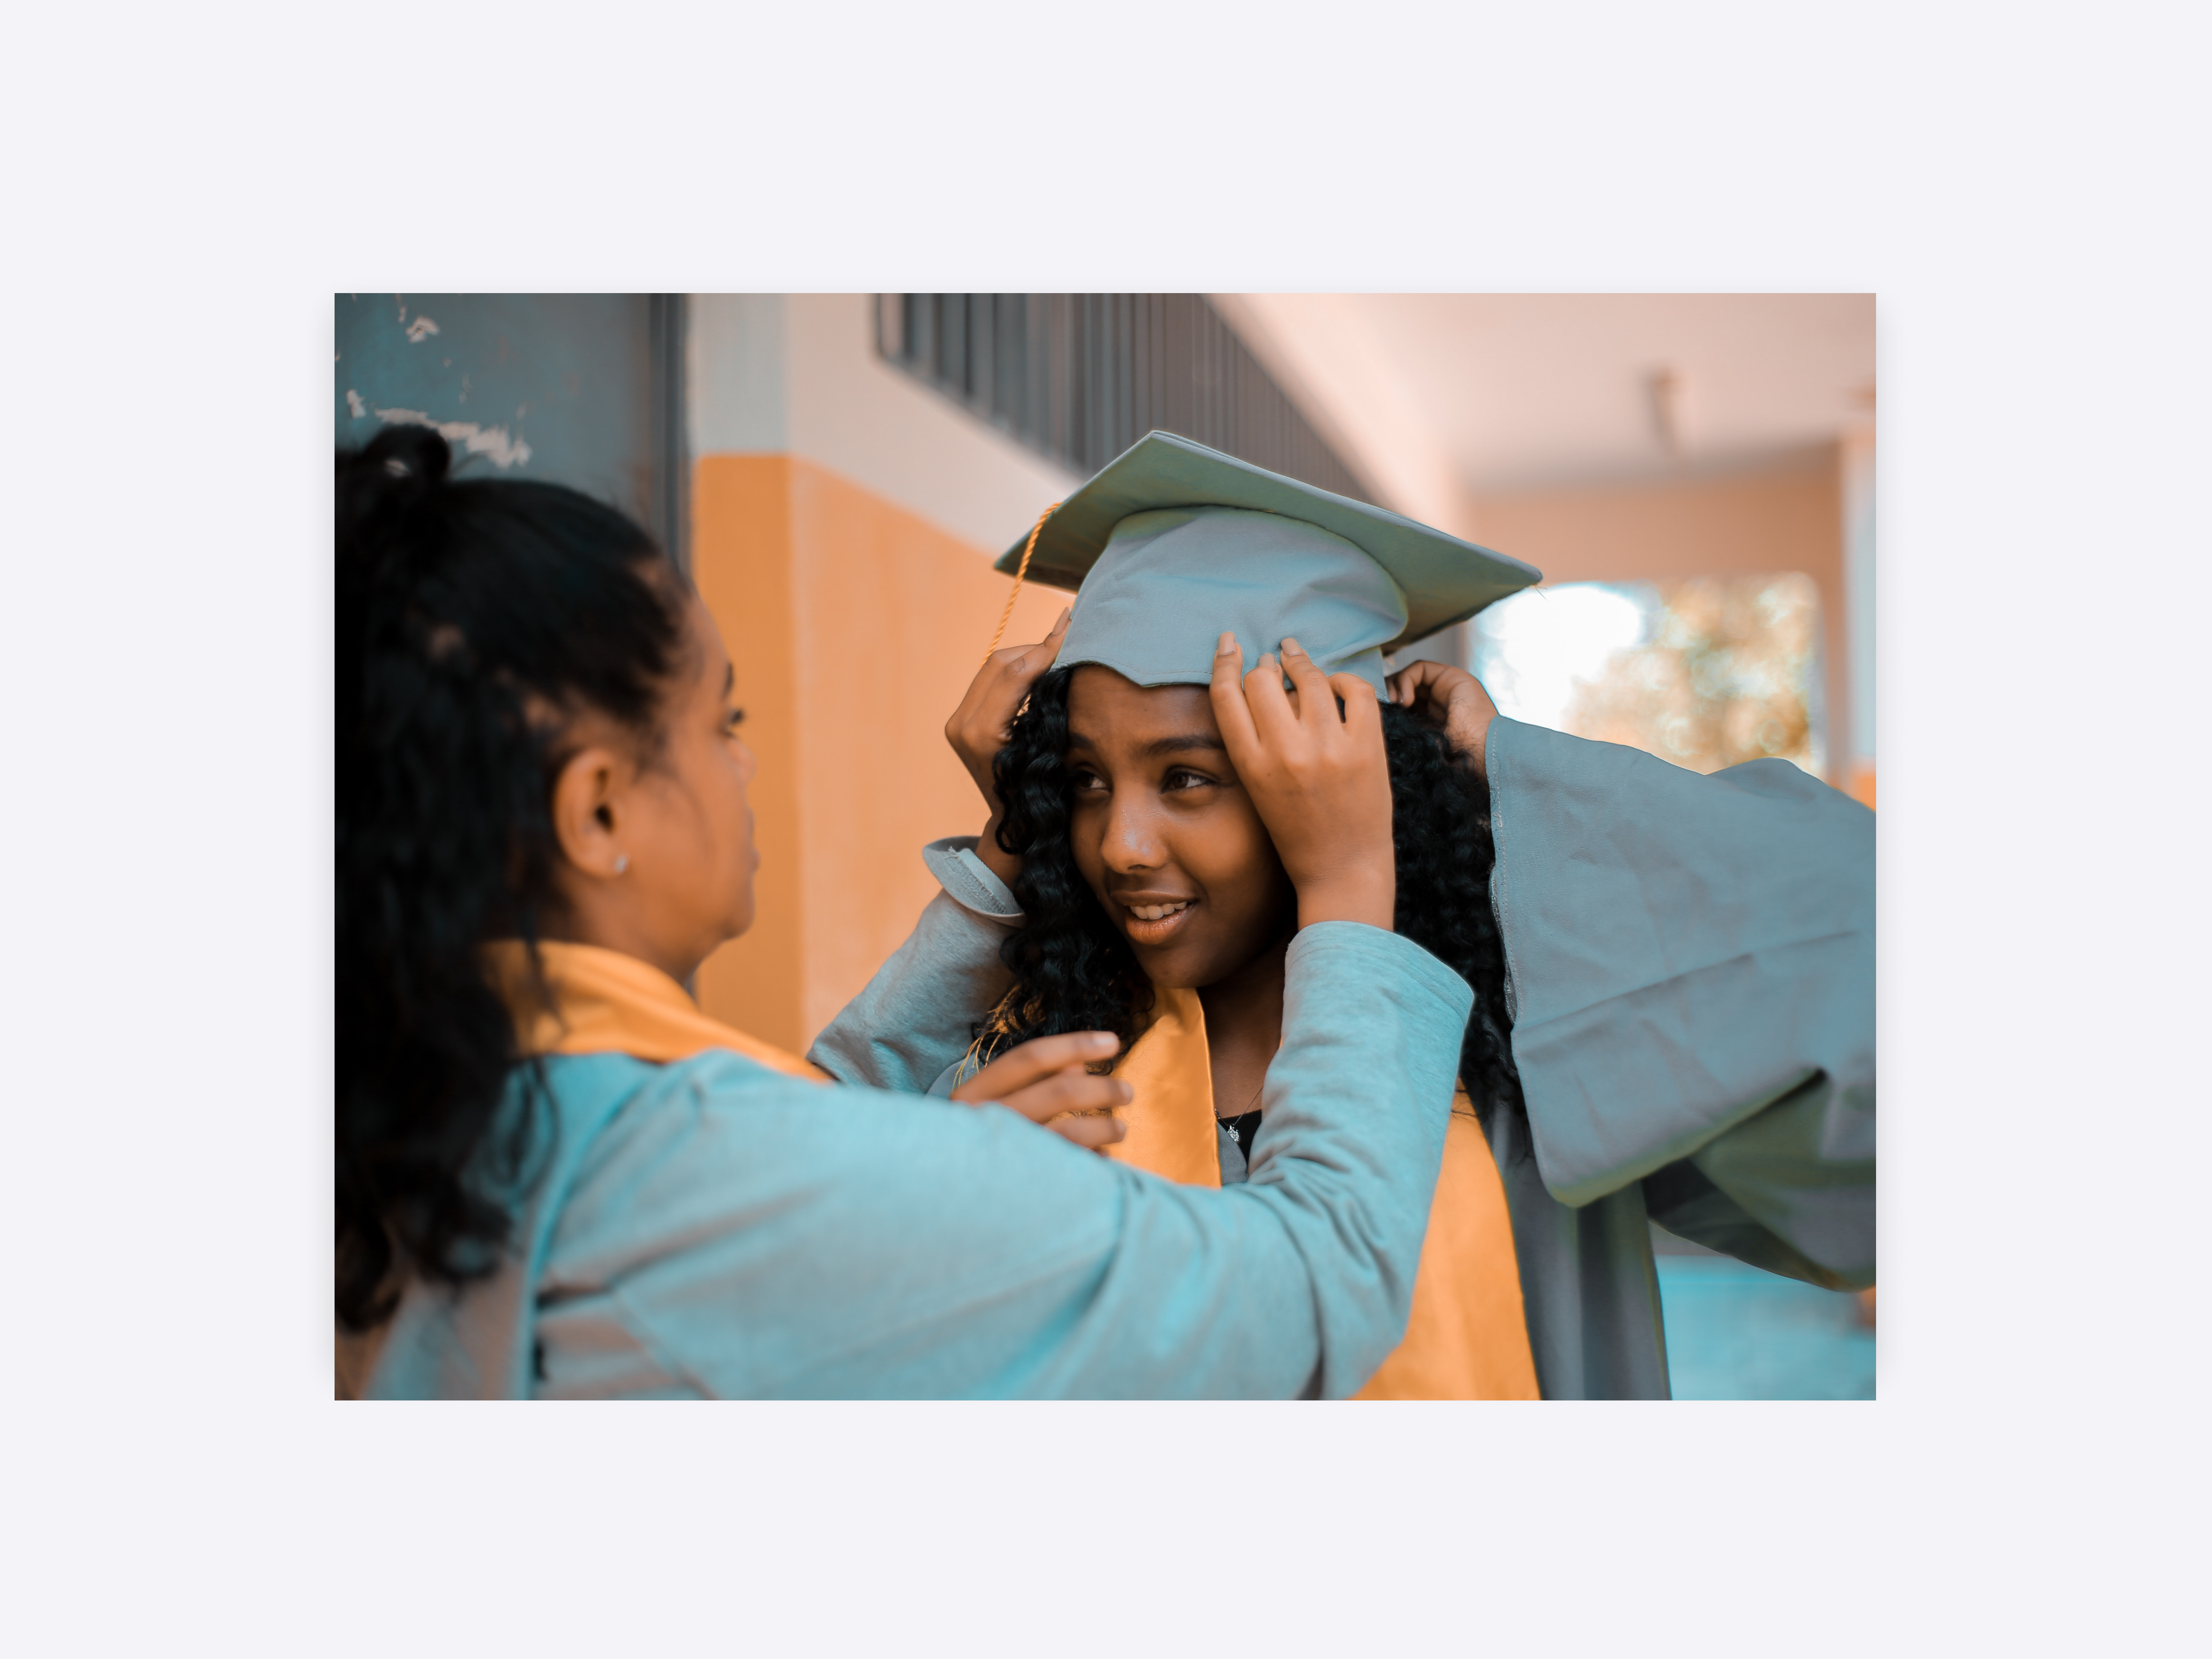 Two girls at graduation. One is helping the other with her graduation cap.